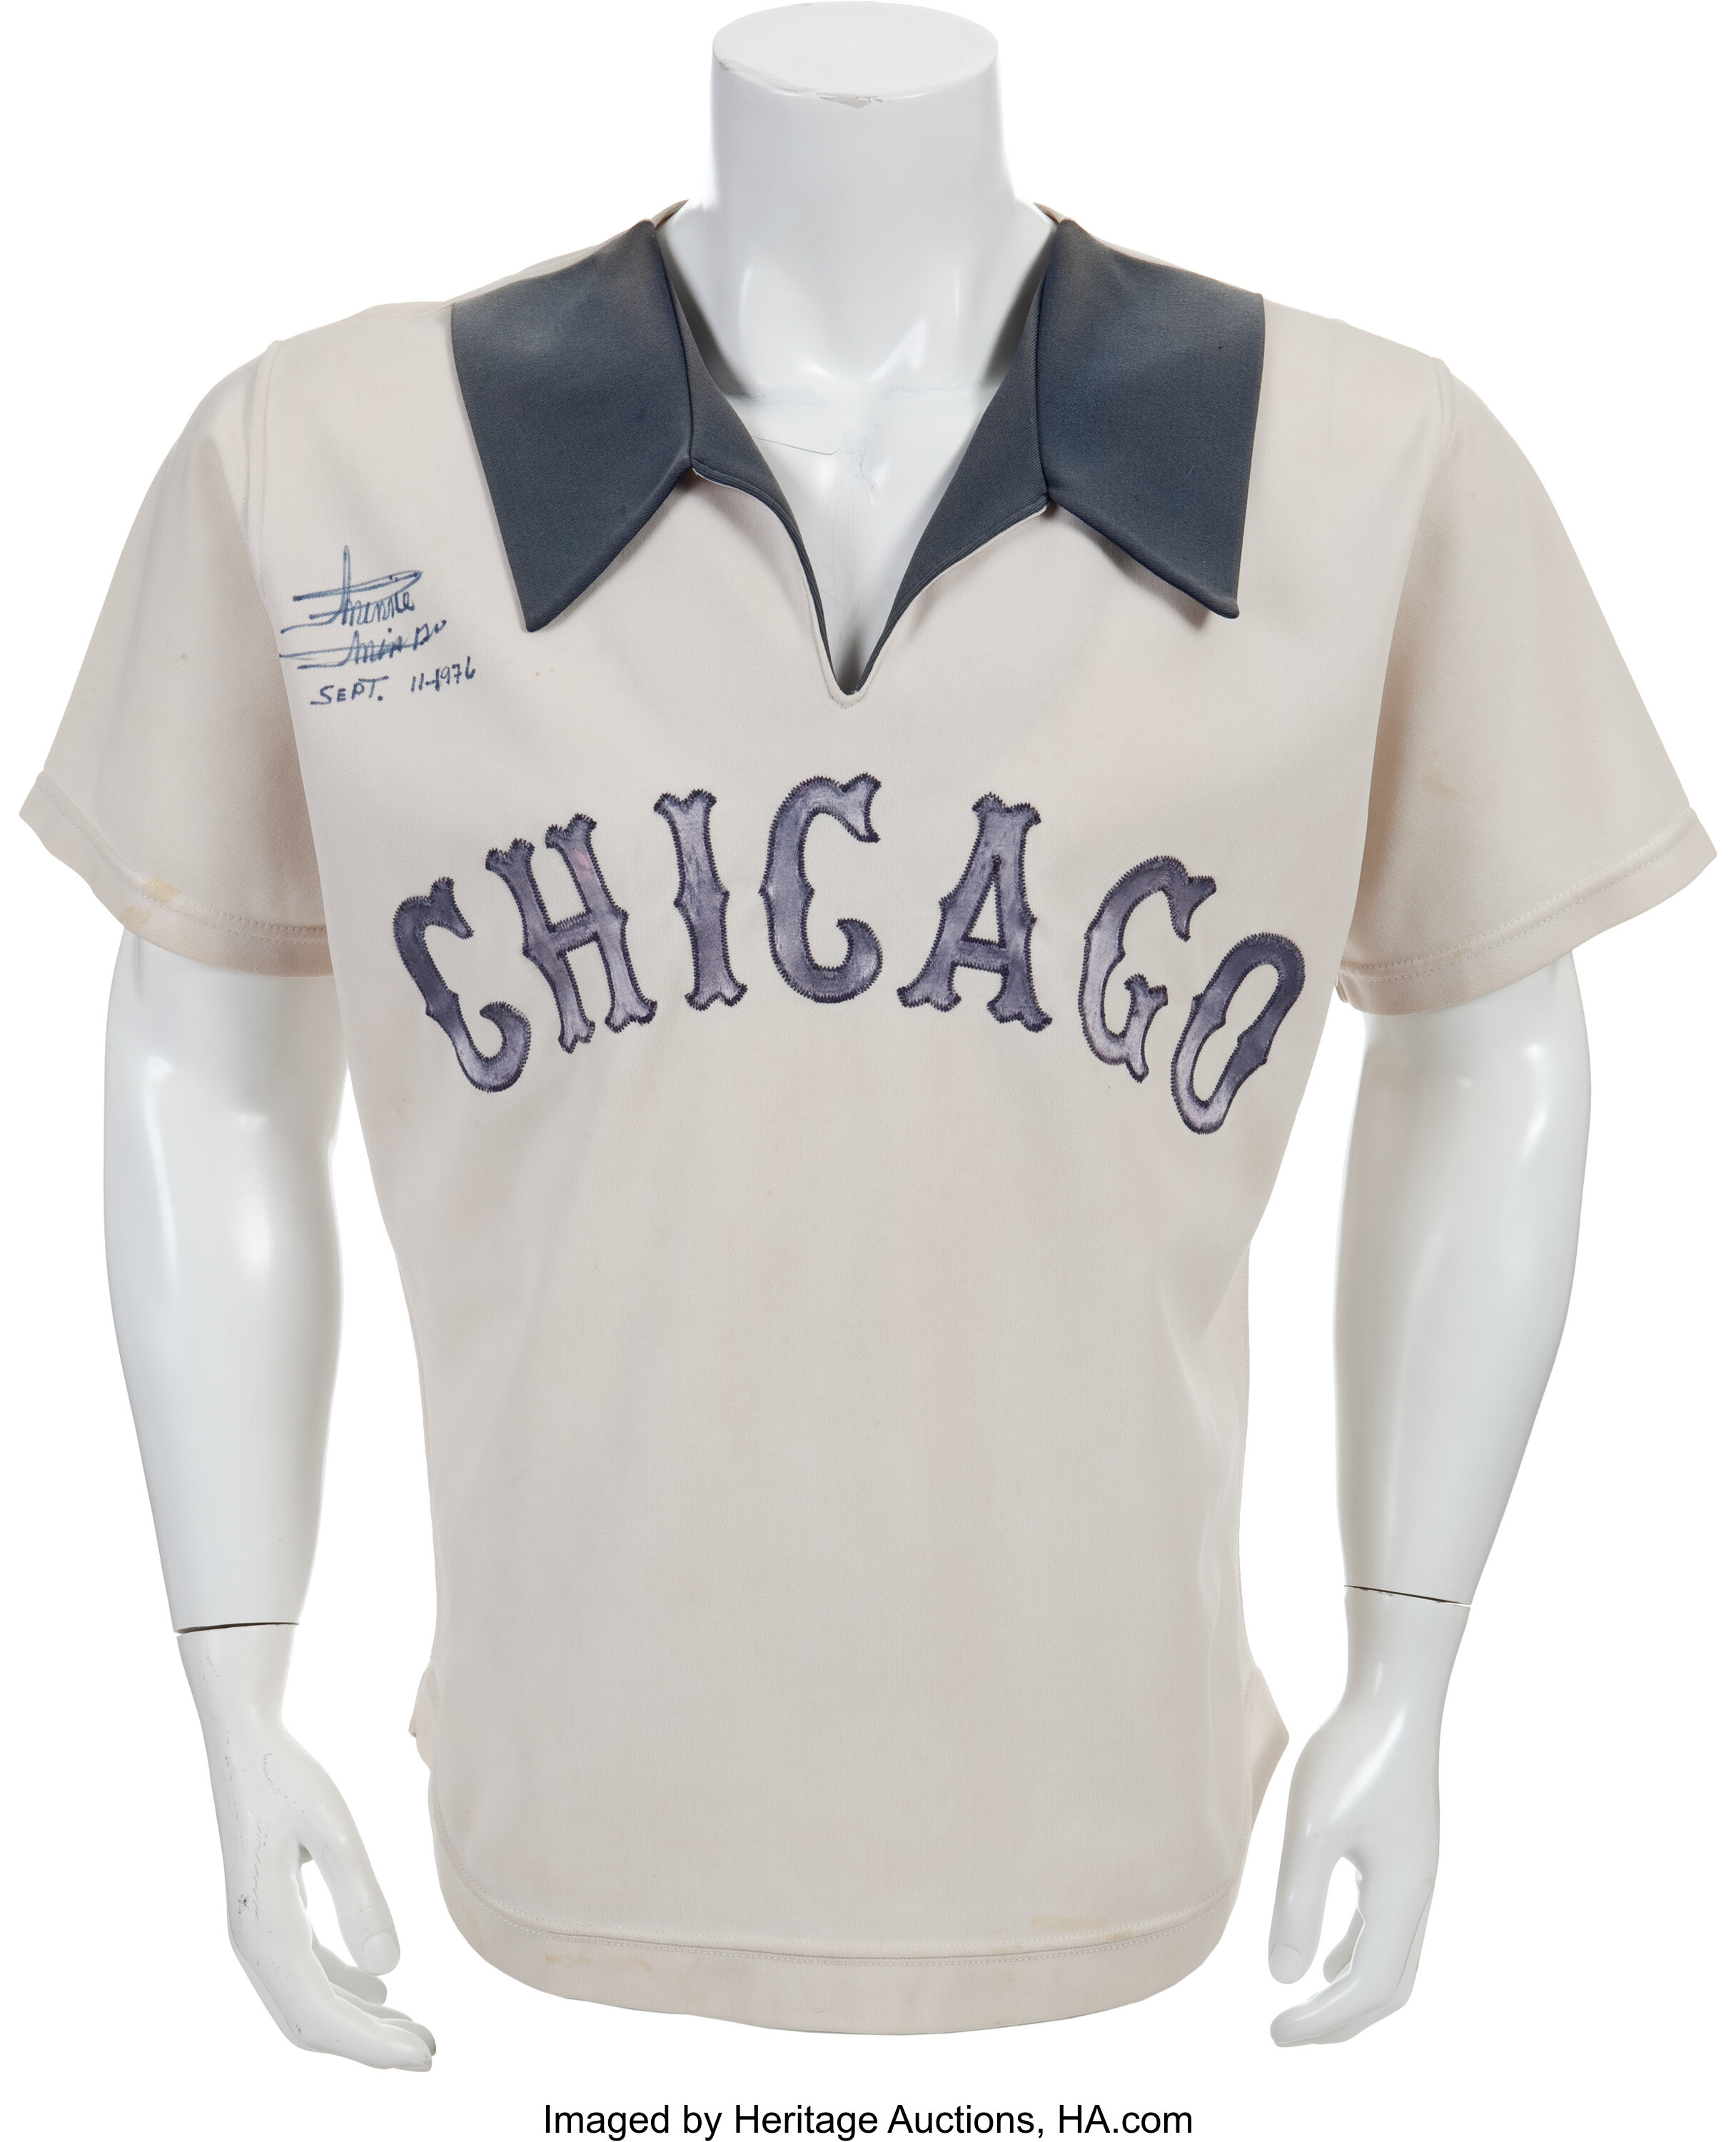 1976 White Sox Uniforms -- Not cool  Chicago white sox baseball, White sox  baseball, Chicago baseball